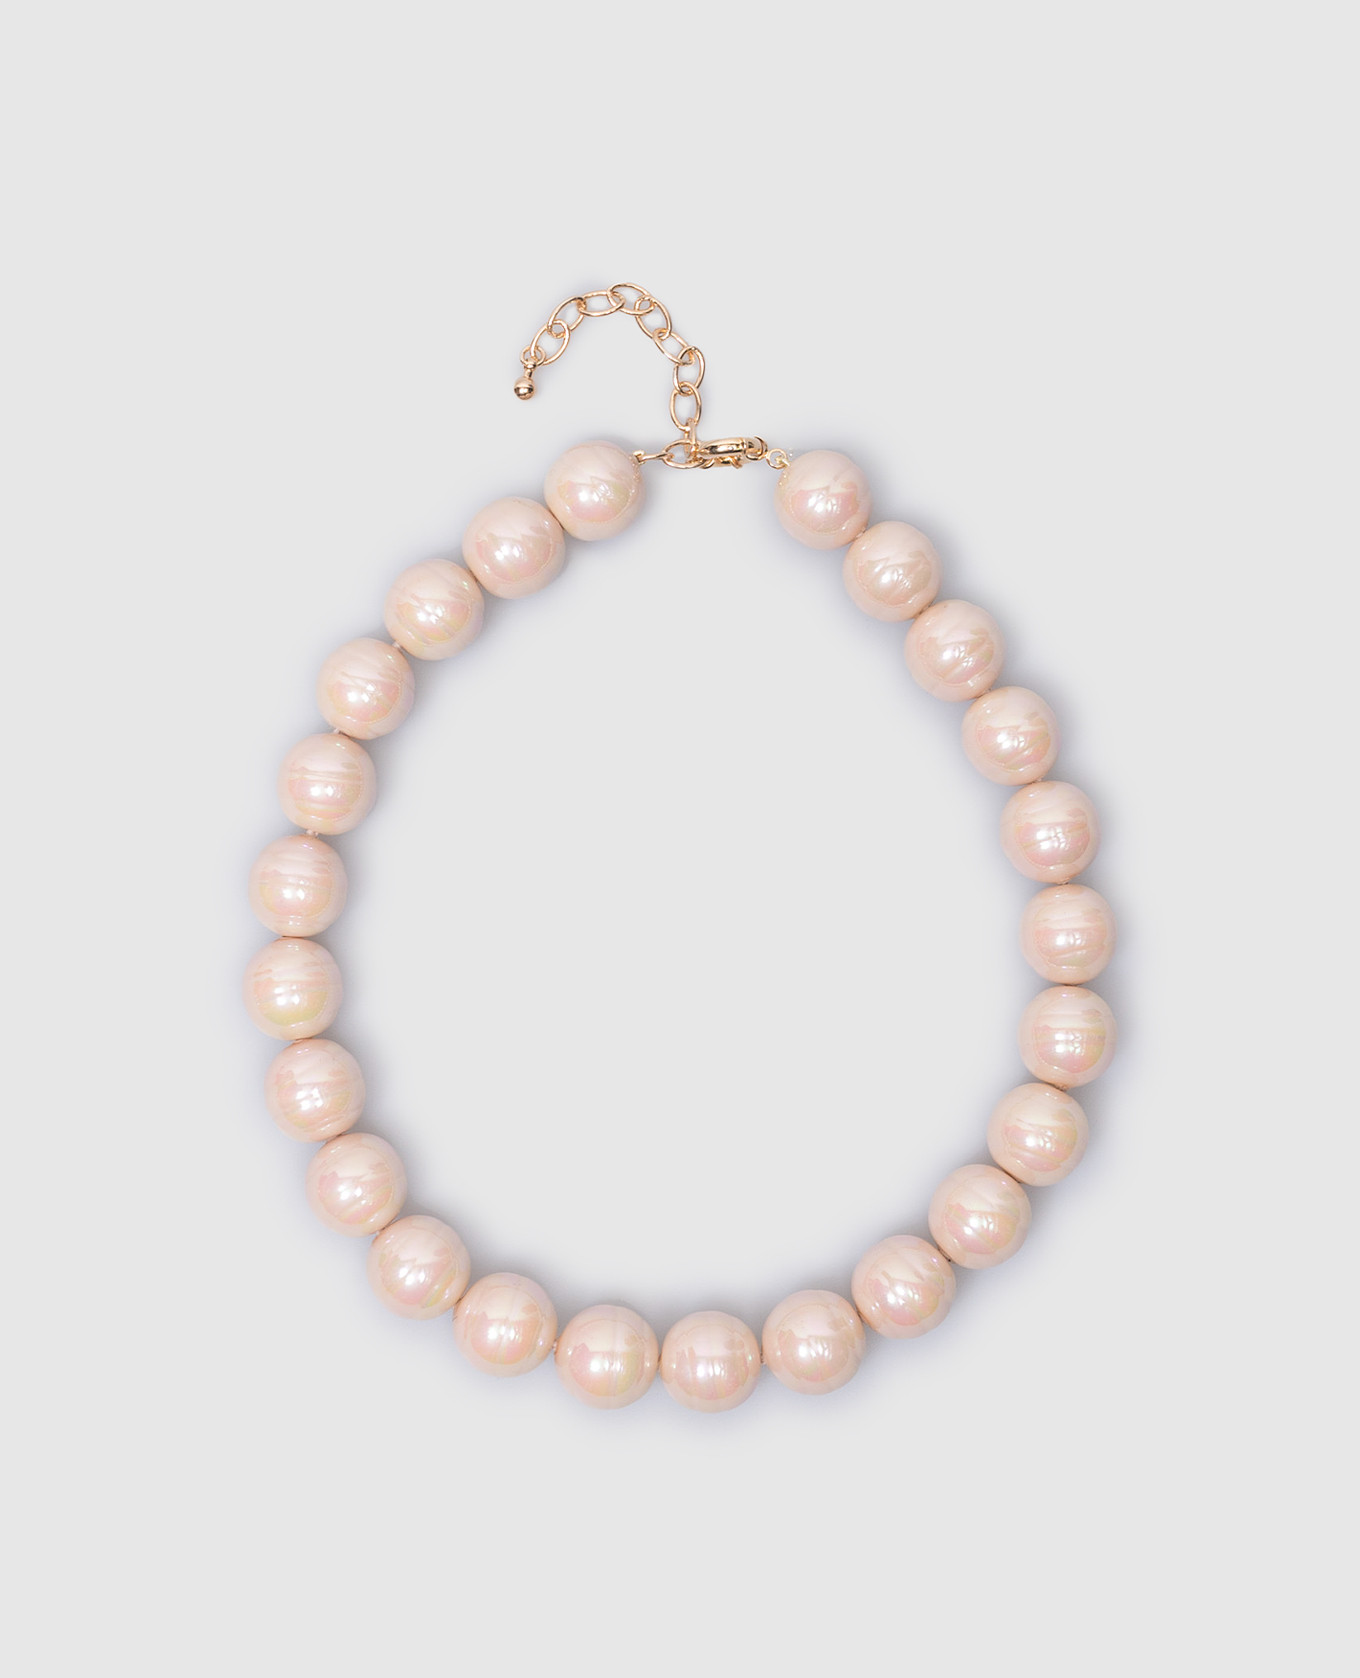 Beige necklace with embossed beads